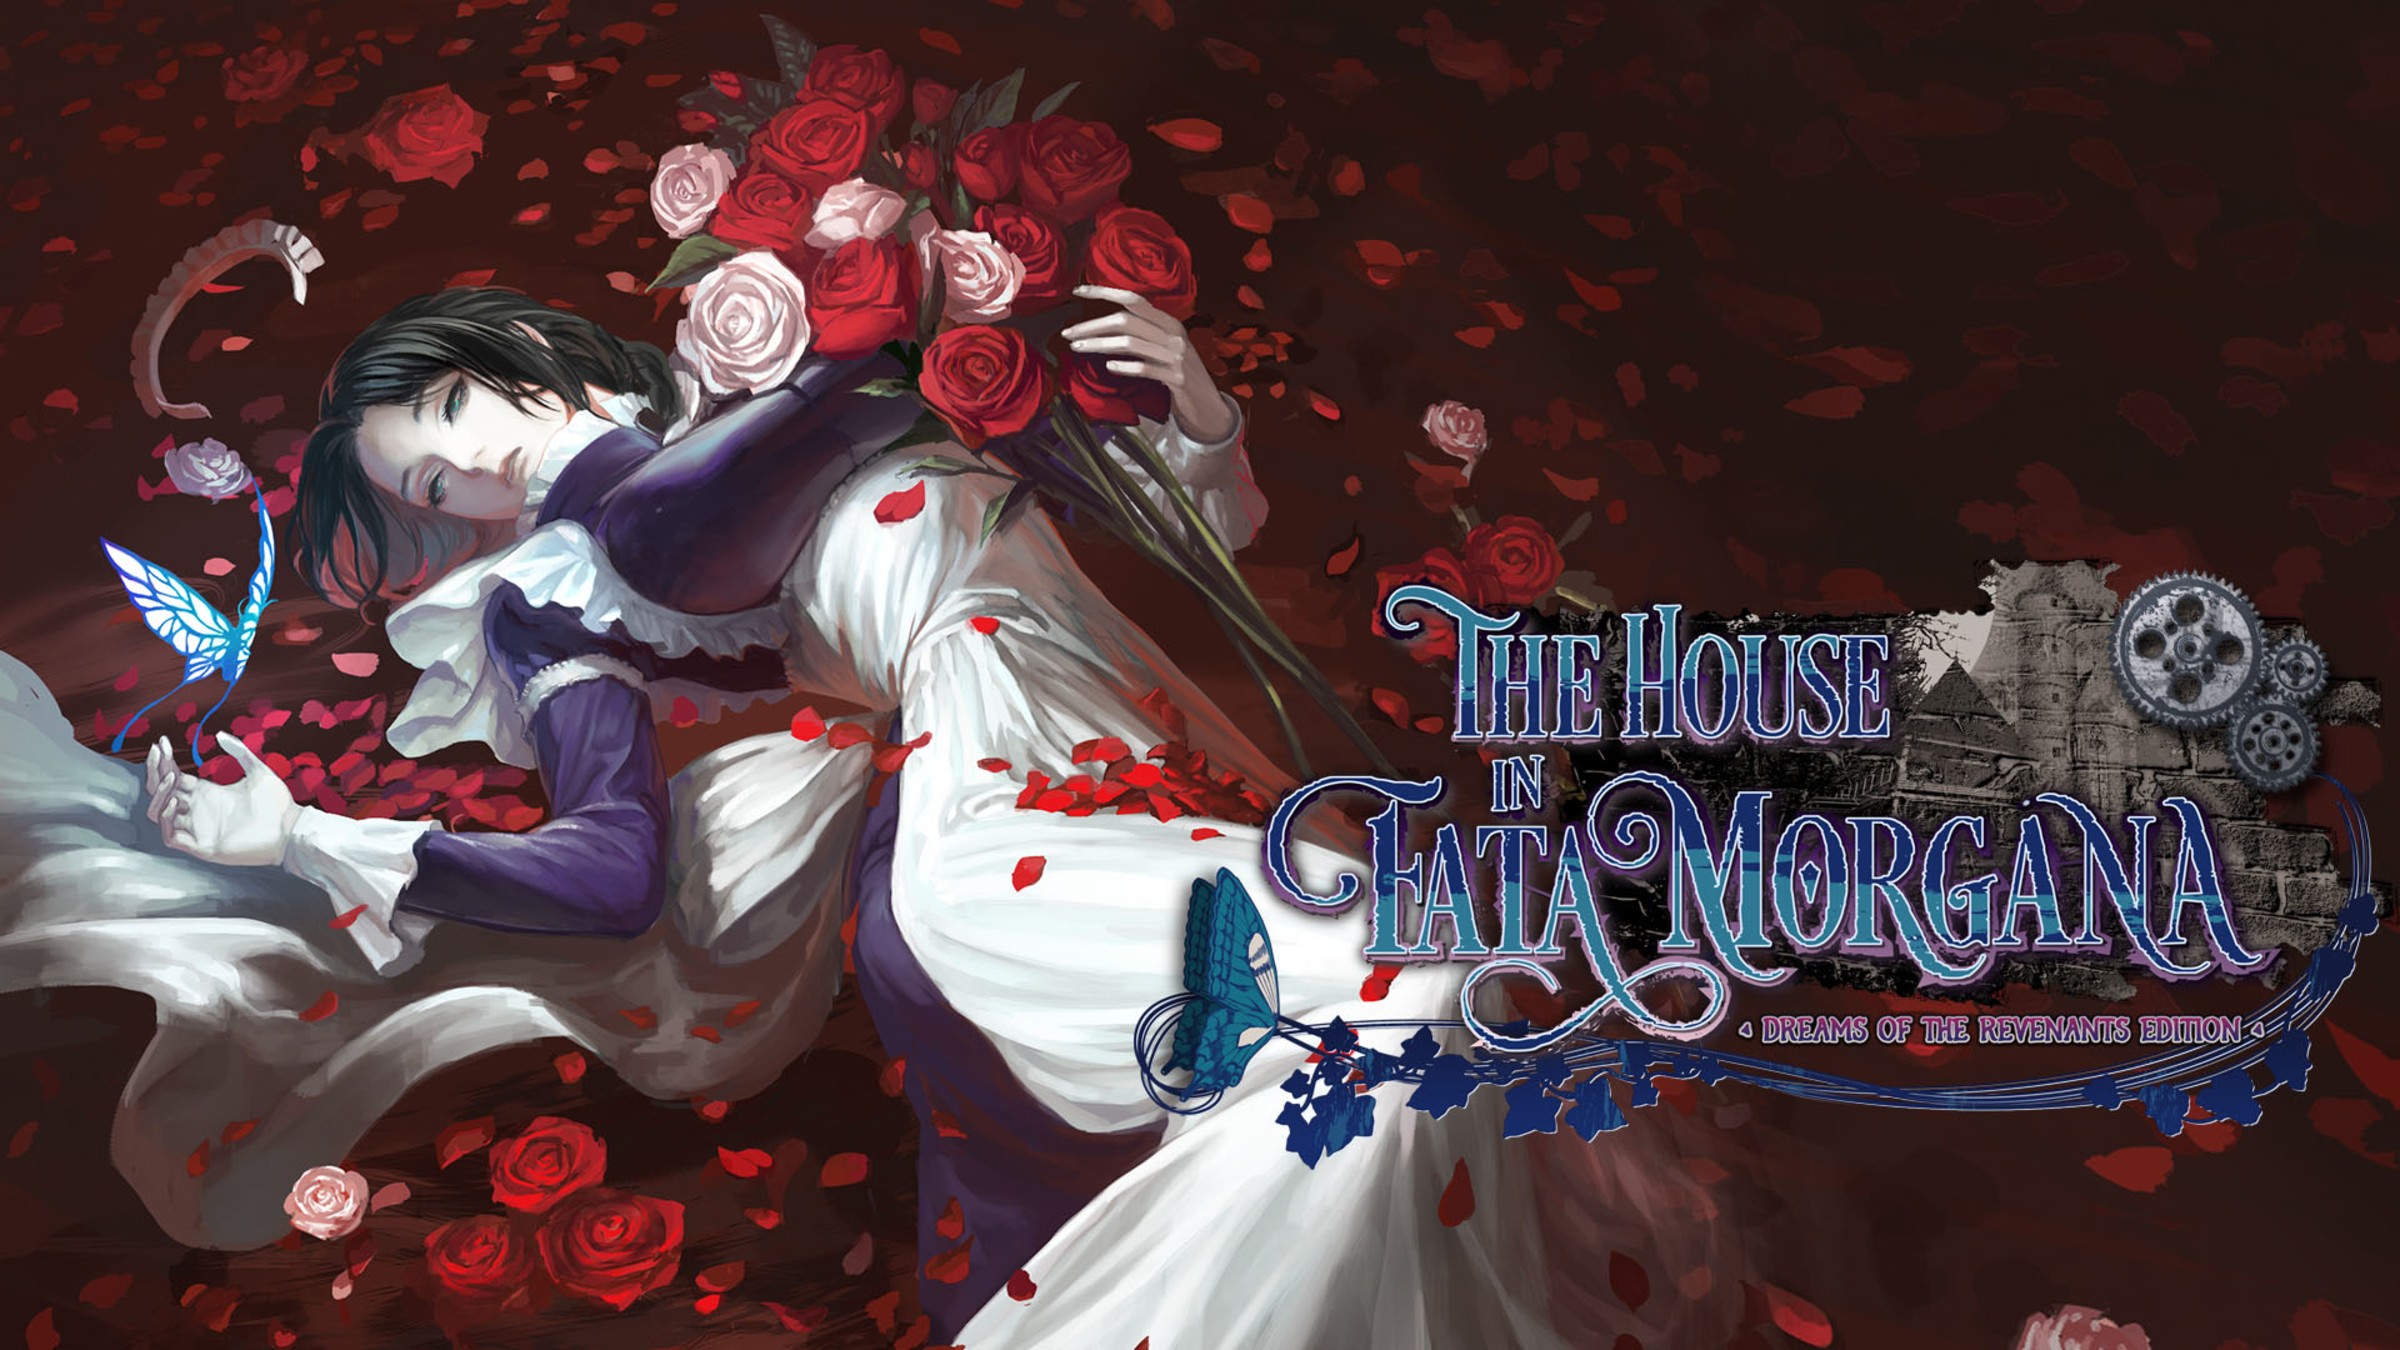 https://assets.nintendo.com/image/upload/c_fill,w_1200/q_auto:best/f_auto/dpr_2.0/ncom/en_US/games/switch/t/the-house-in-fata-morgana-dreams-of-the-revenants-edition-switch/hero